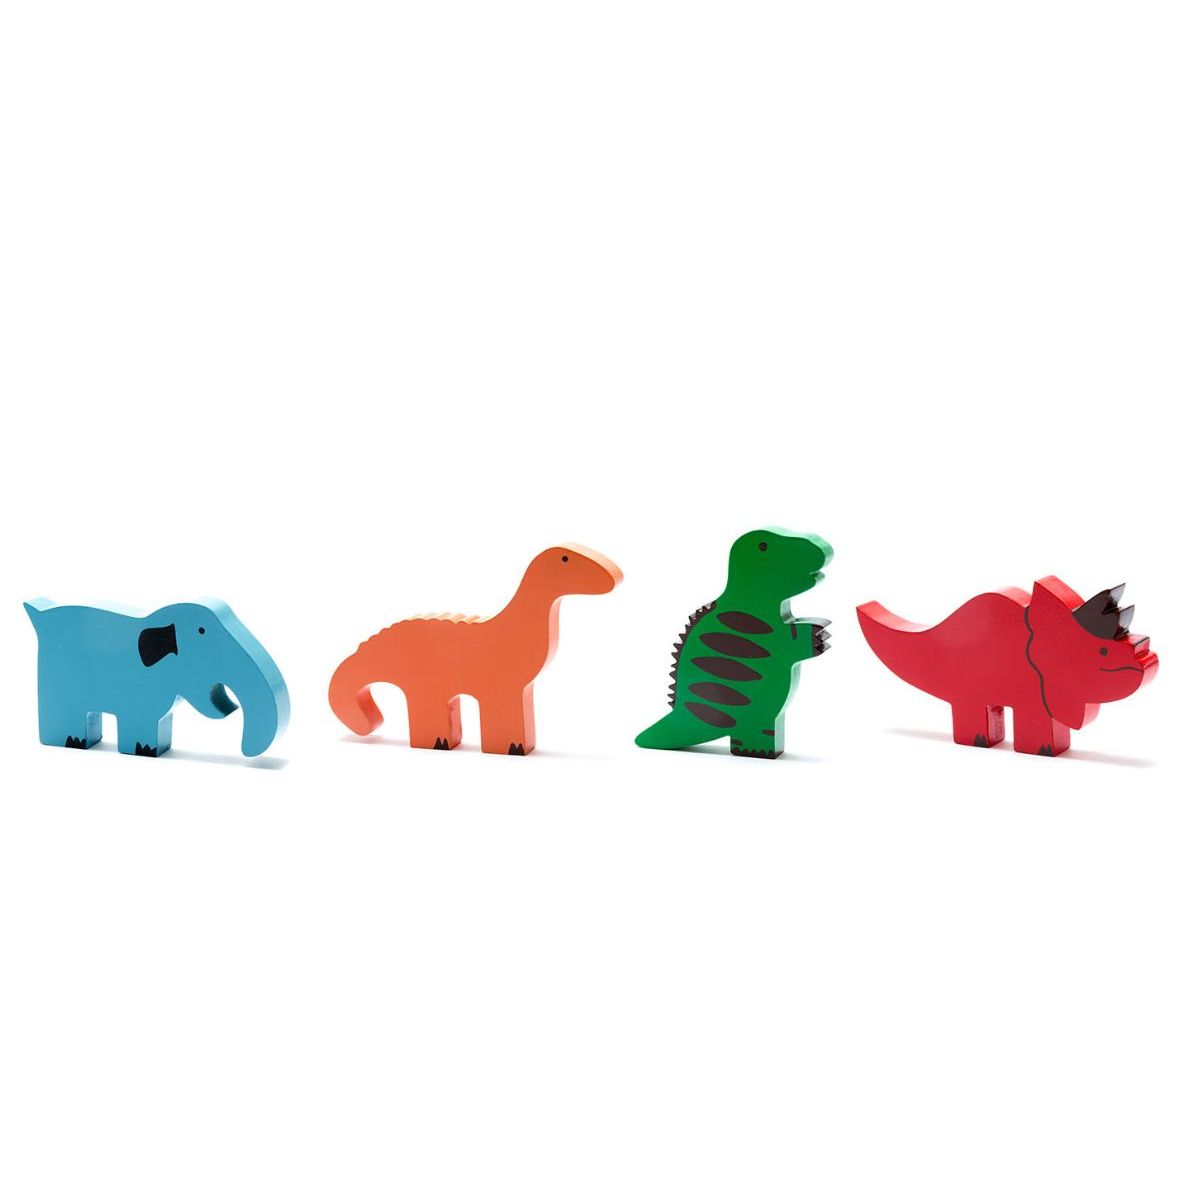 The four available wooden toys from Best Years. From left to right, a blue mammoth, an orange diplodocus, a green t. rex and a red triceratops.